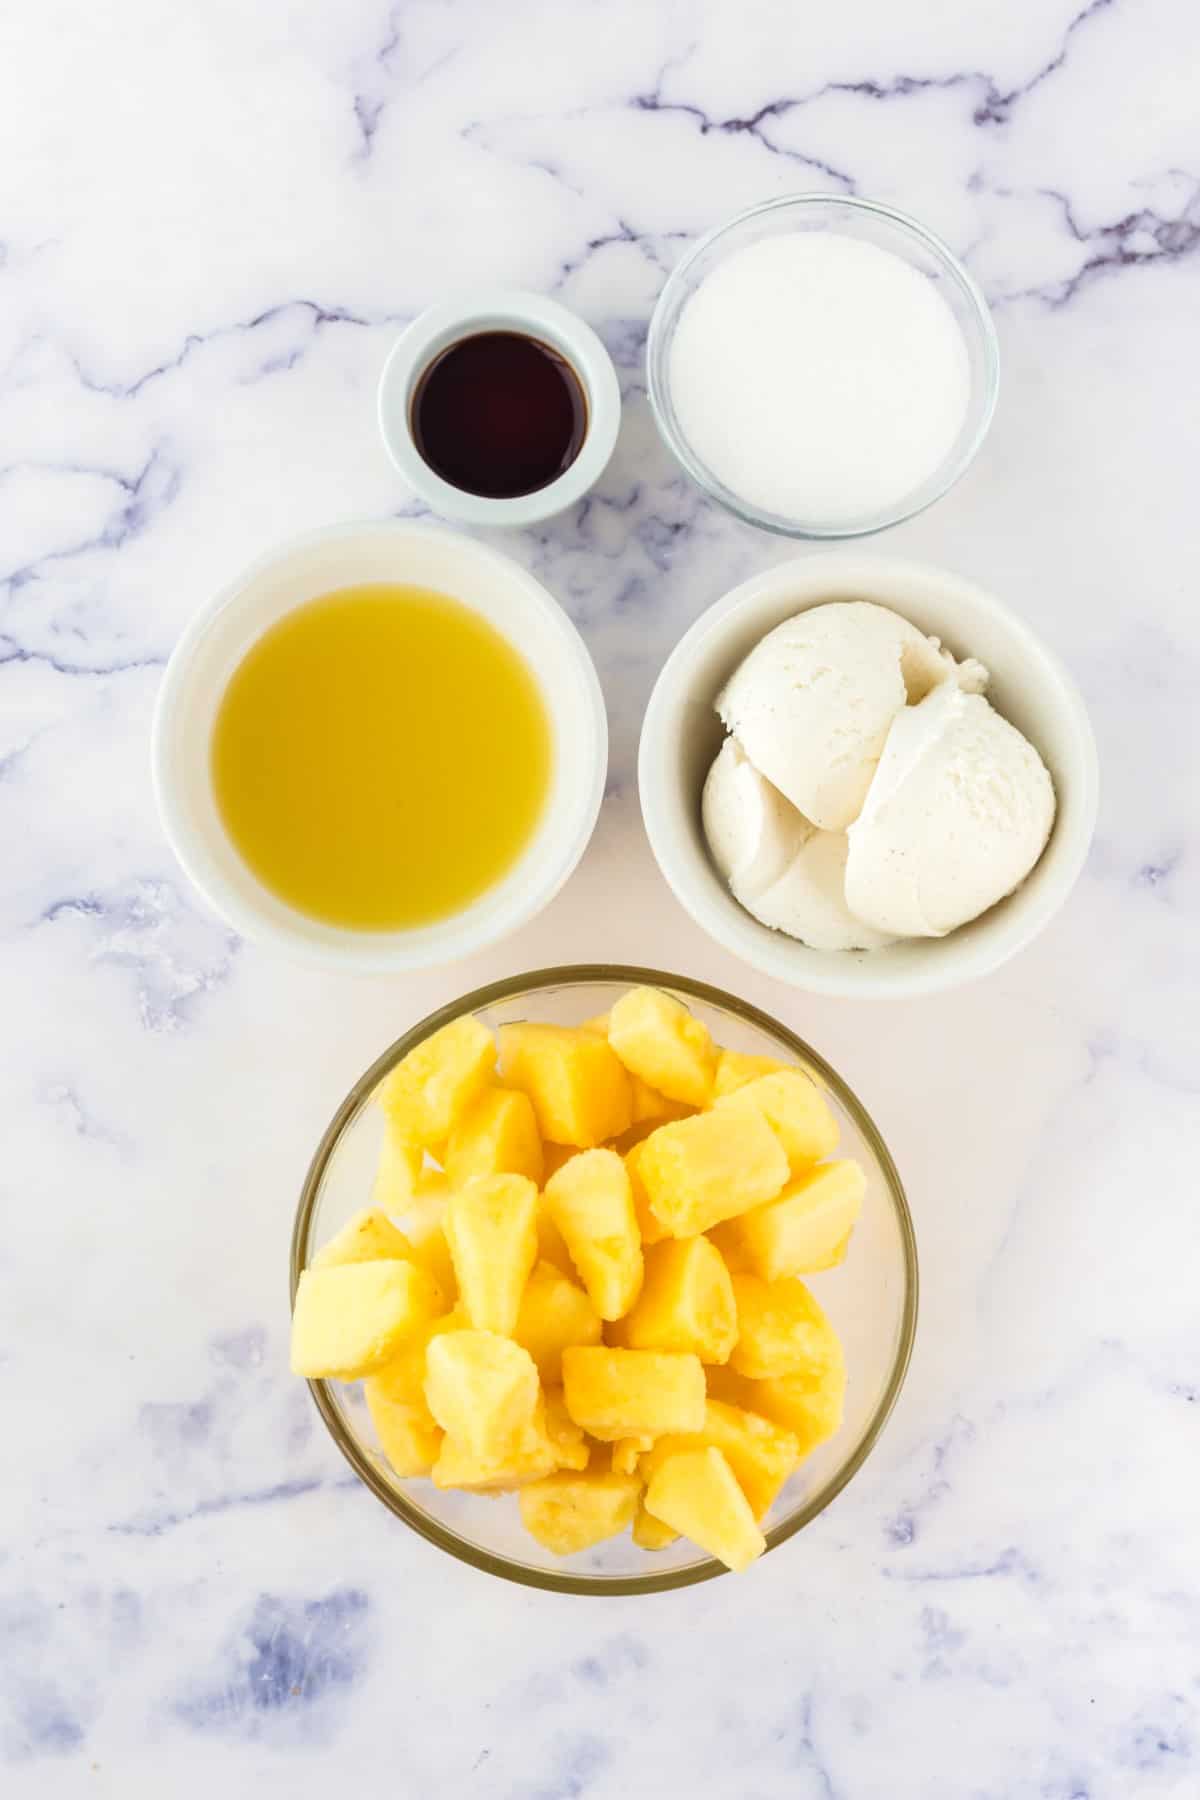 Ingredients for Pineapple Dole Whip. 